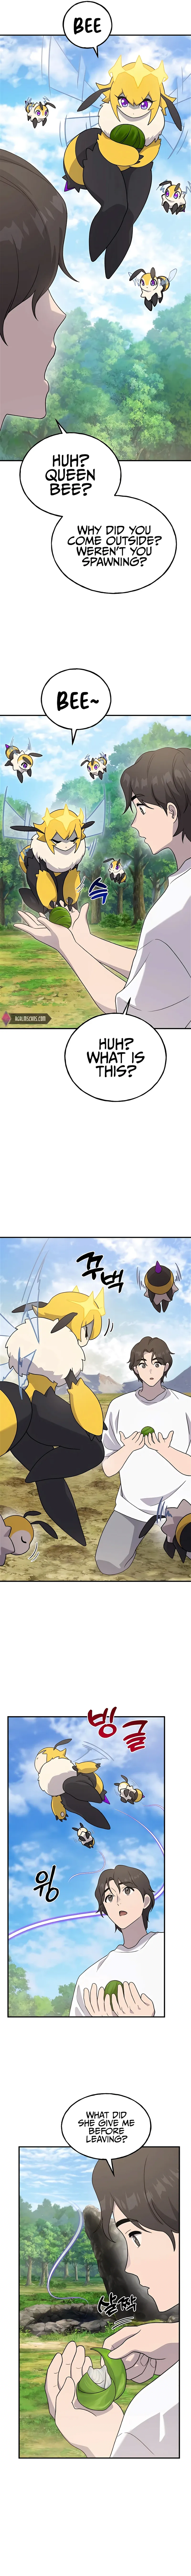 Solo Farming In The Tower Chapter 28 page 5